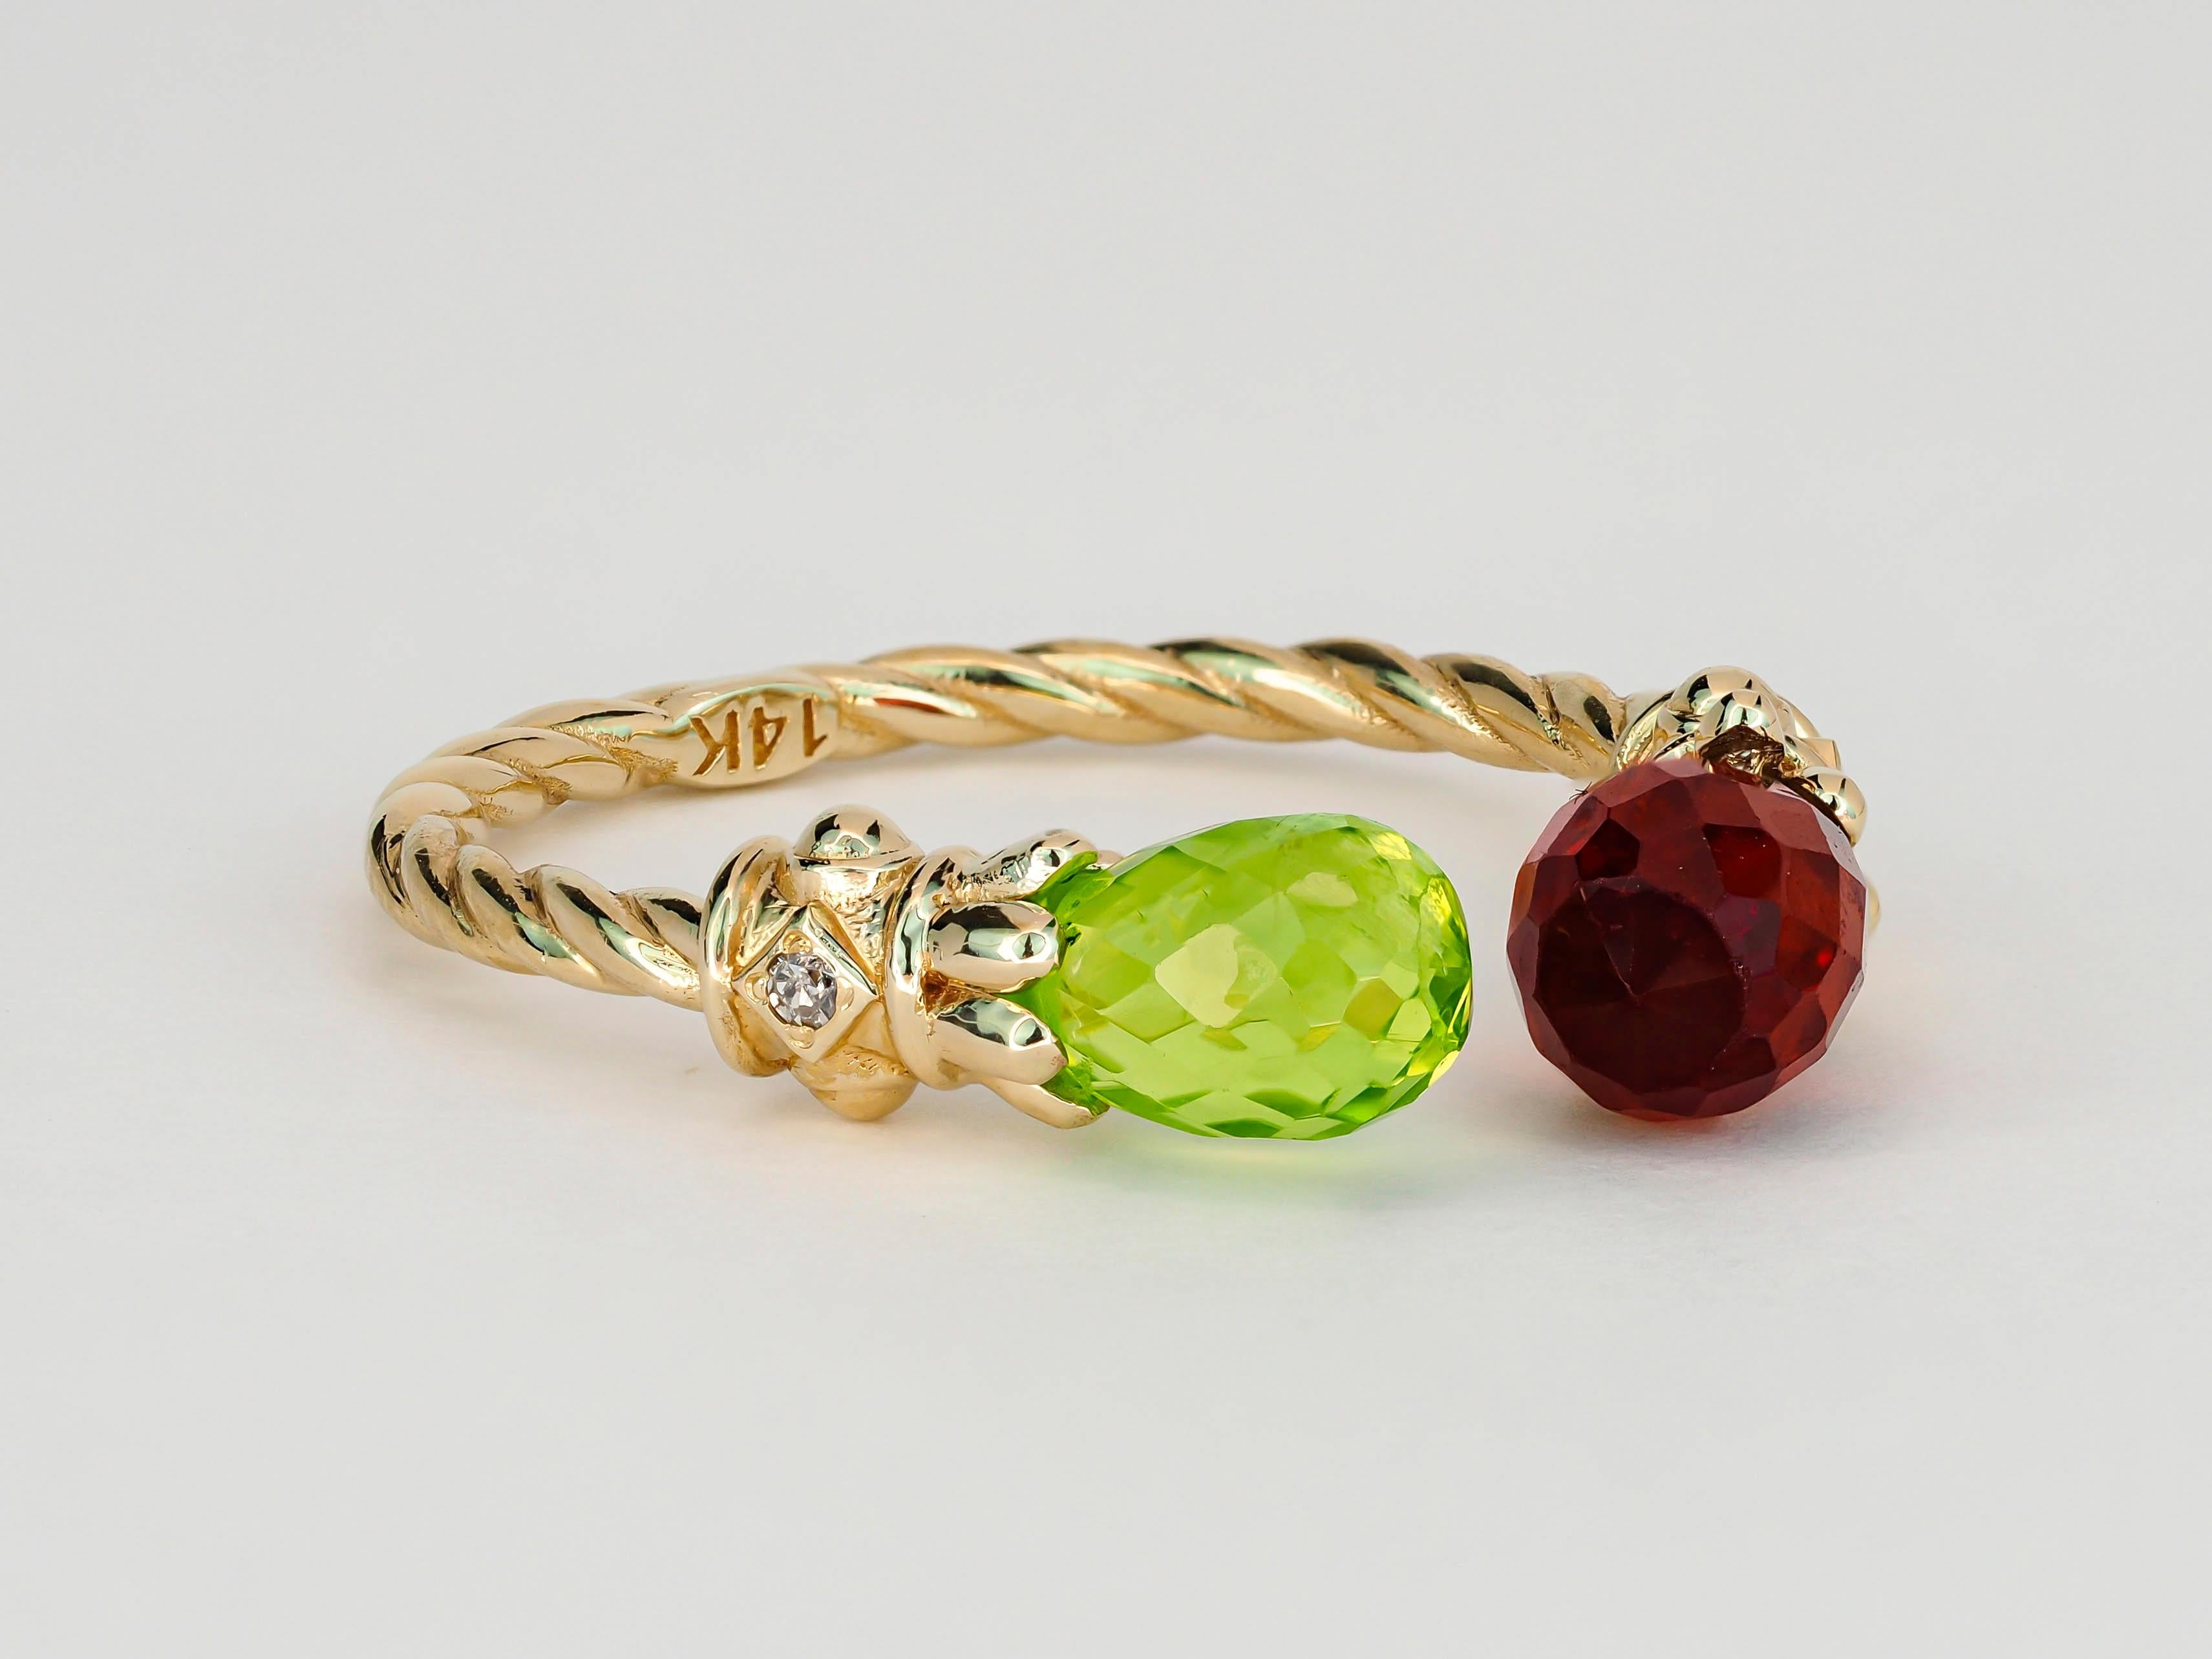 For Sale:   Open ended gold ring with peridot, garnet and diamonds 16